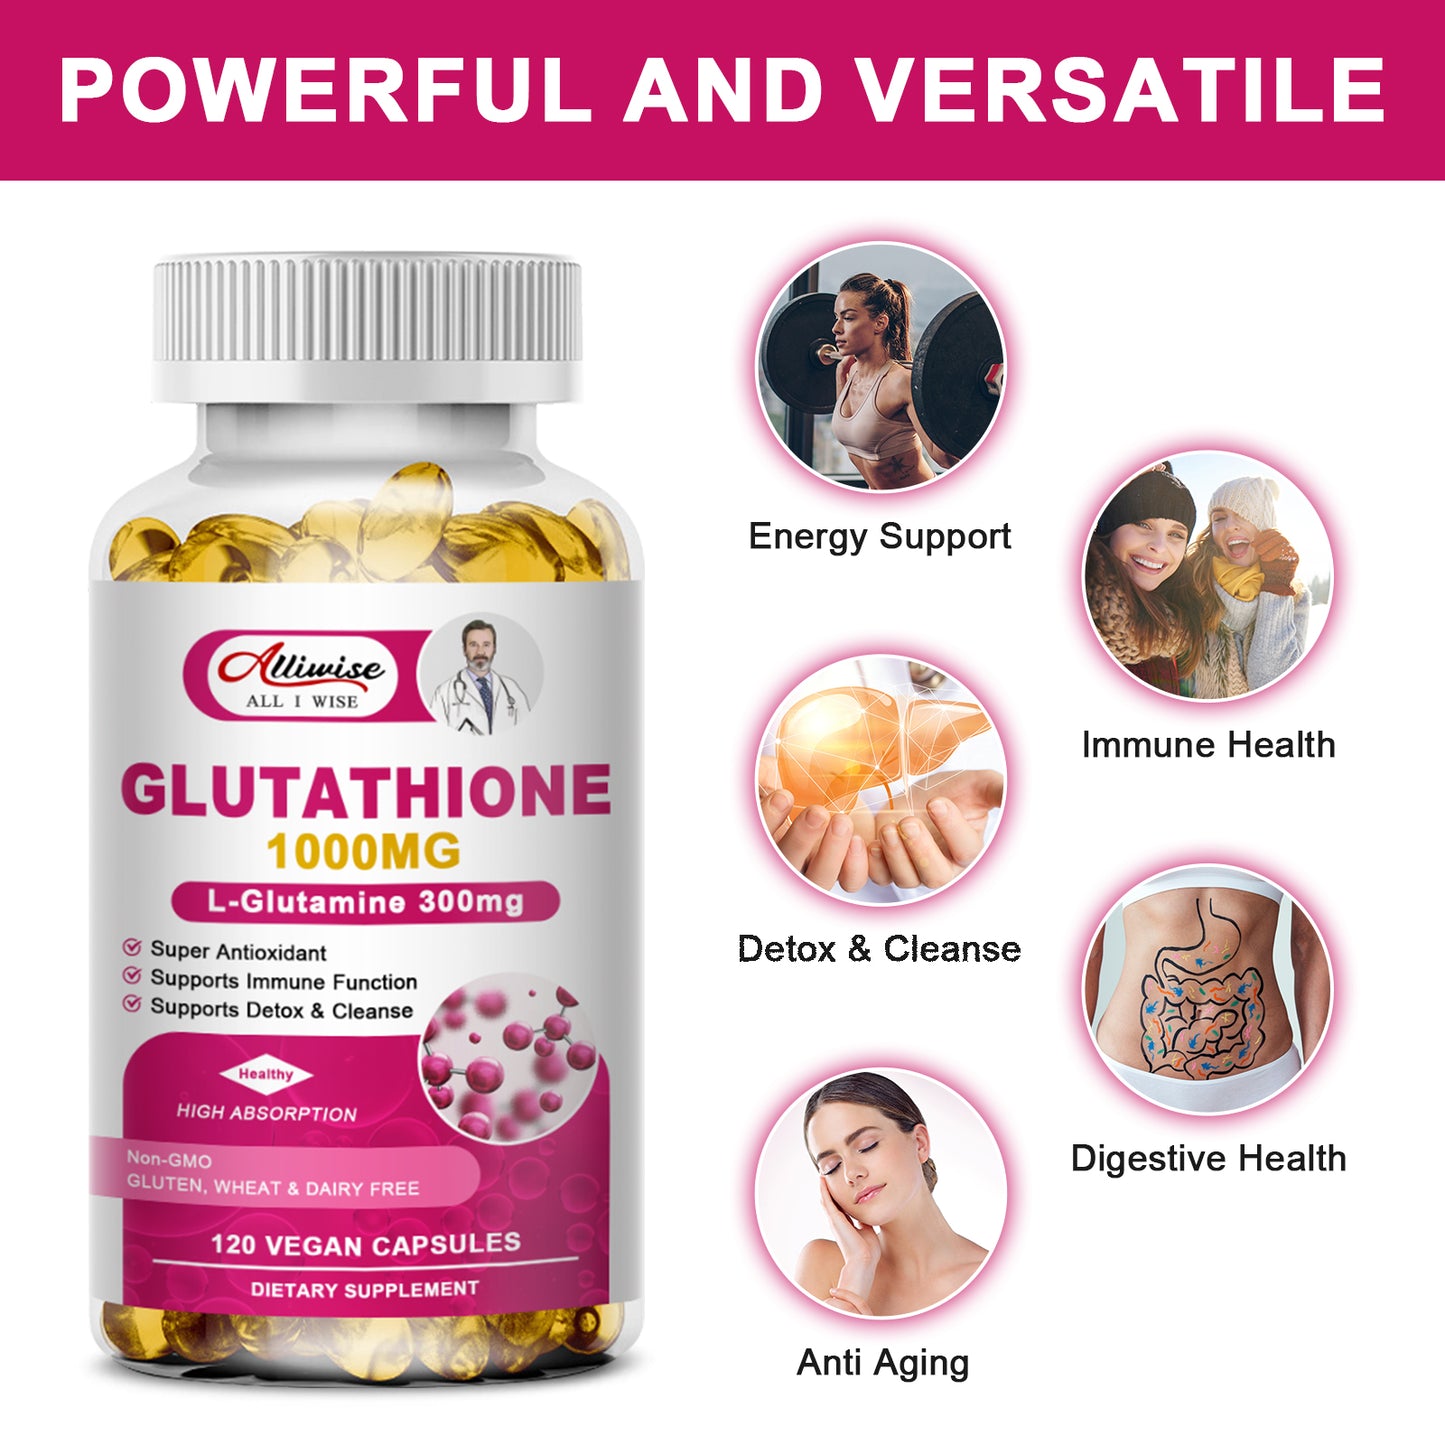 High Strength Liposomal Glutathione Capsules -1000mg Active Reduced Form Glutathione with L-Glutamine 300mg Enhanced Absorption - Non GMO Antioxidant, Detox & Cleanse, Immune Health Support-120 caps